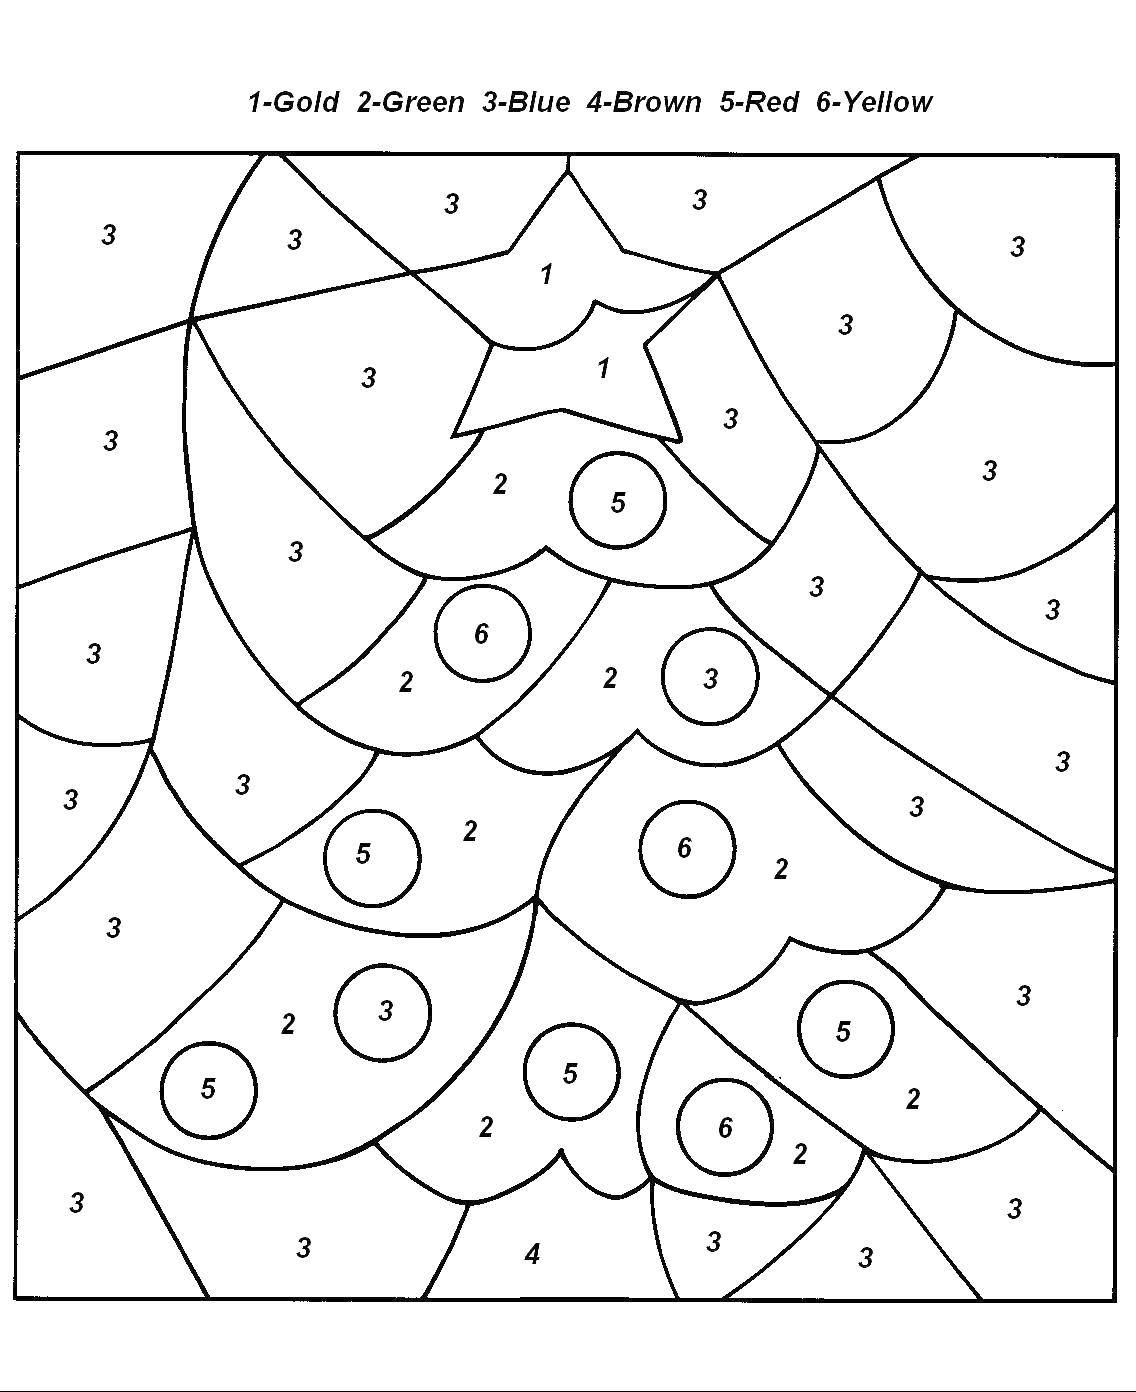 Coloring Color by numbers Christmas tree. Category That number. Tags:  The sample numbers.